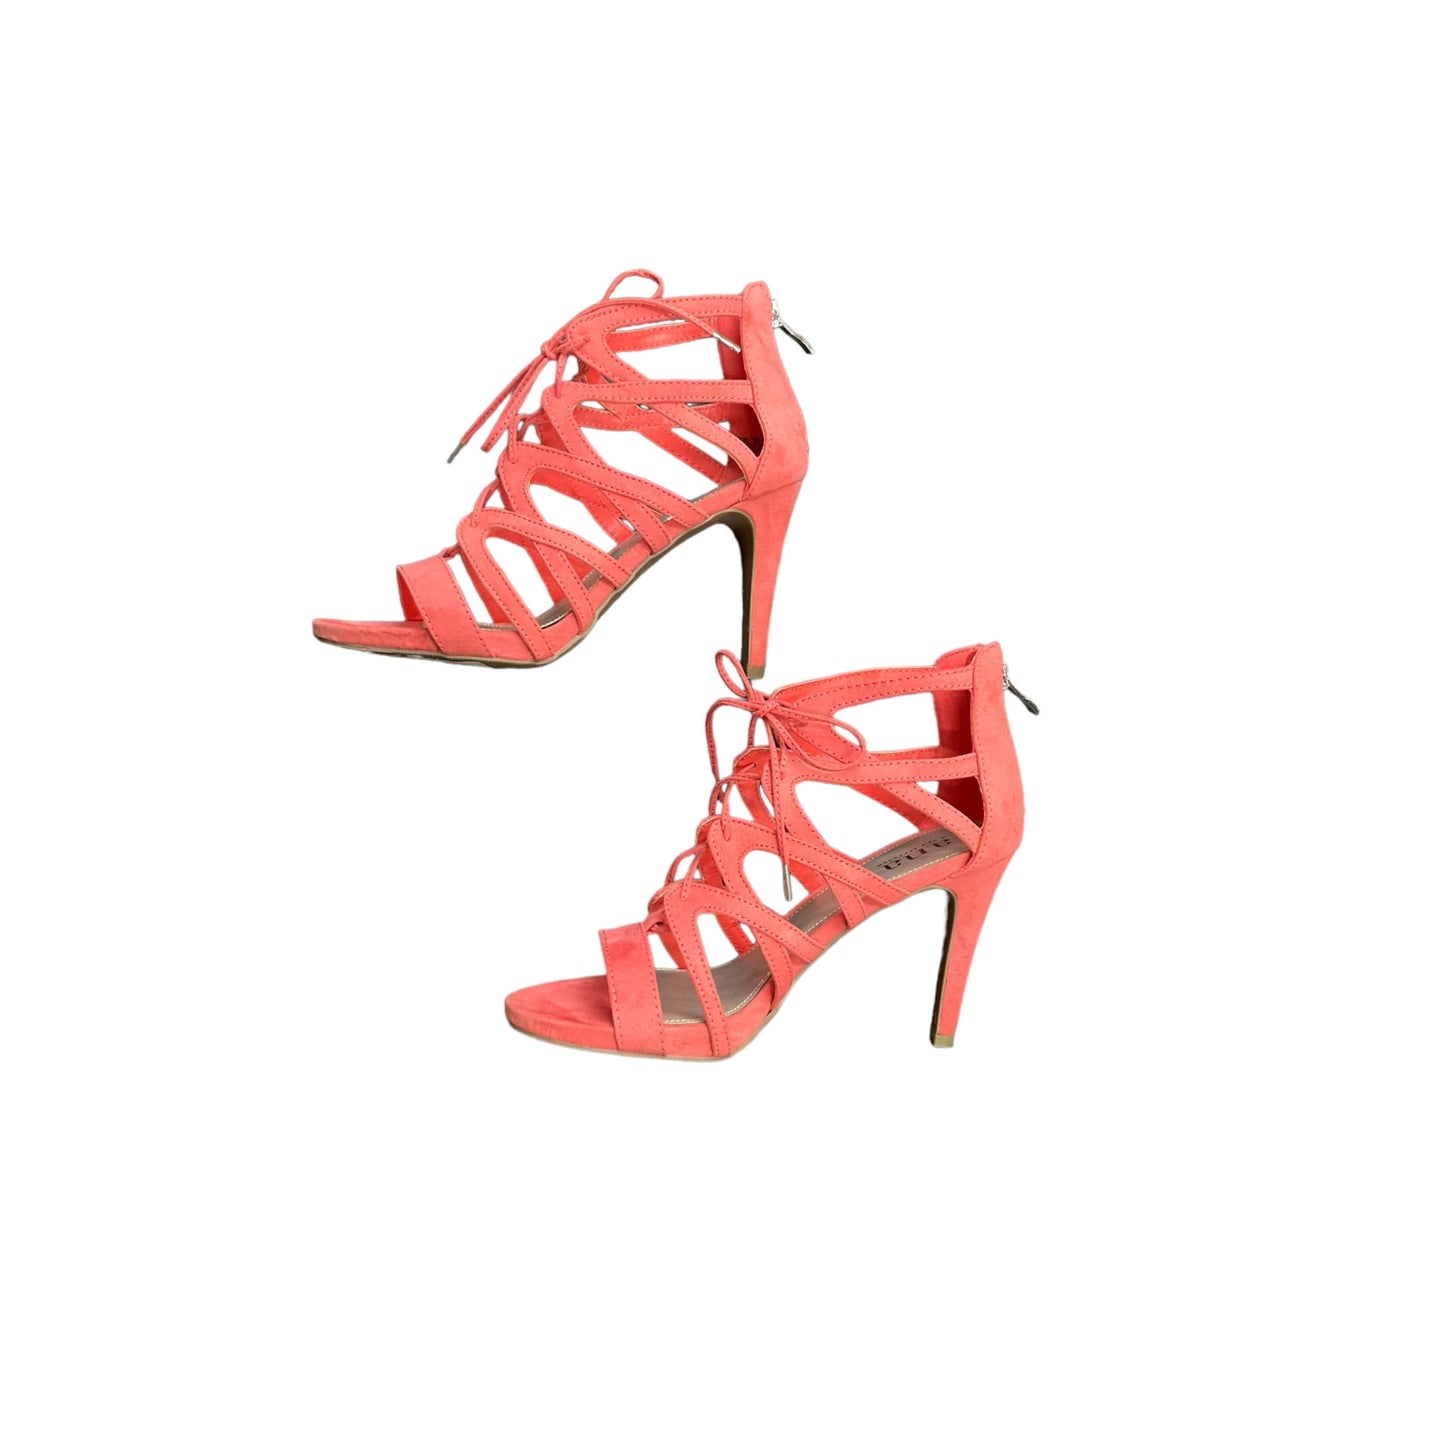 Shoes Heels Stiletto By Ana  Size: 8.5